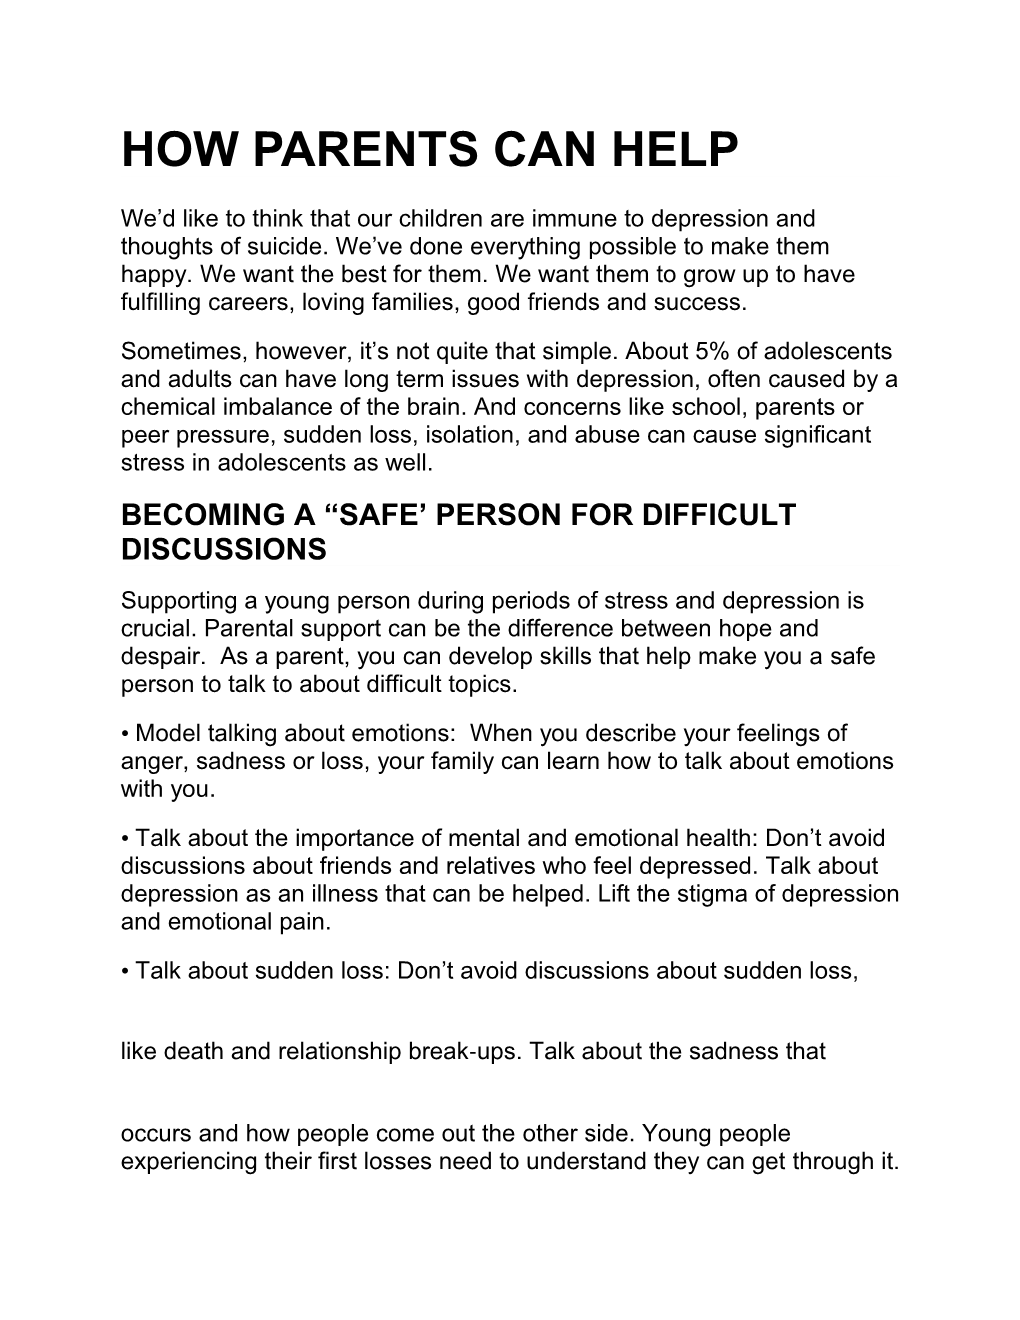 How Parents Can Help